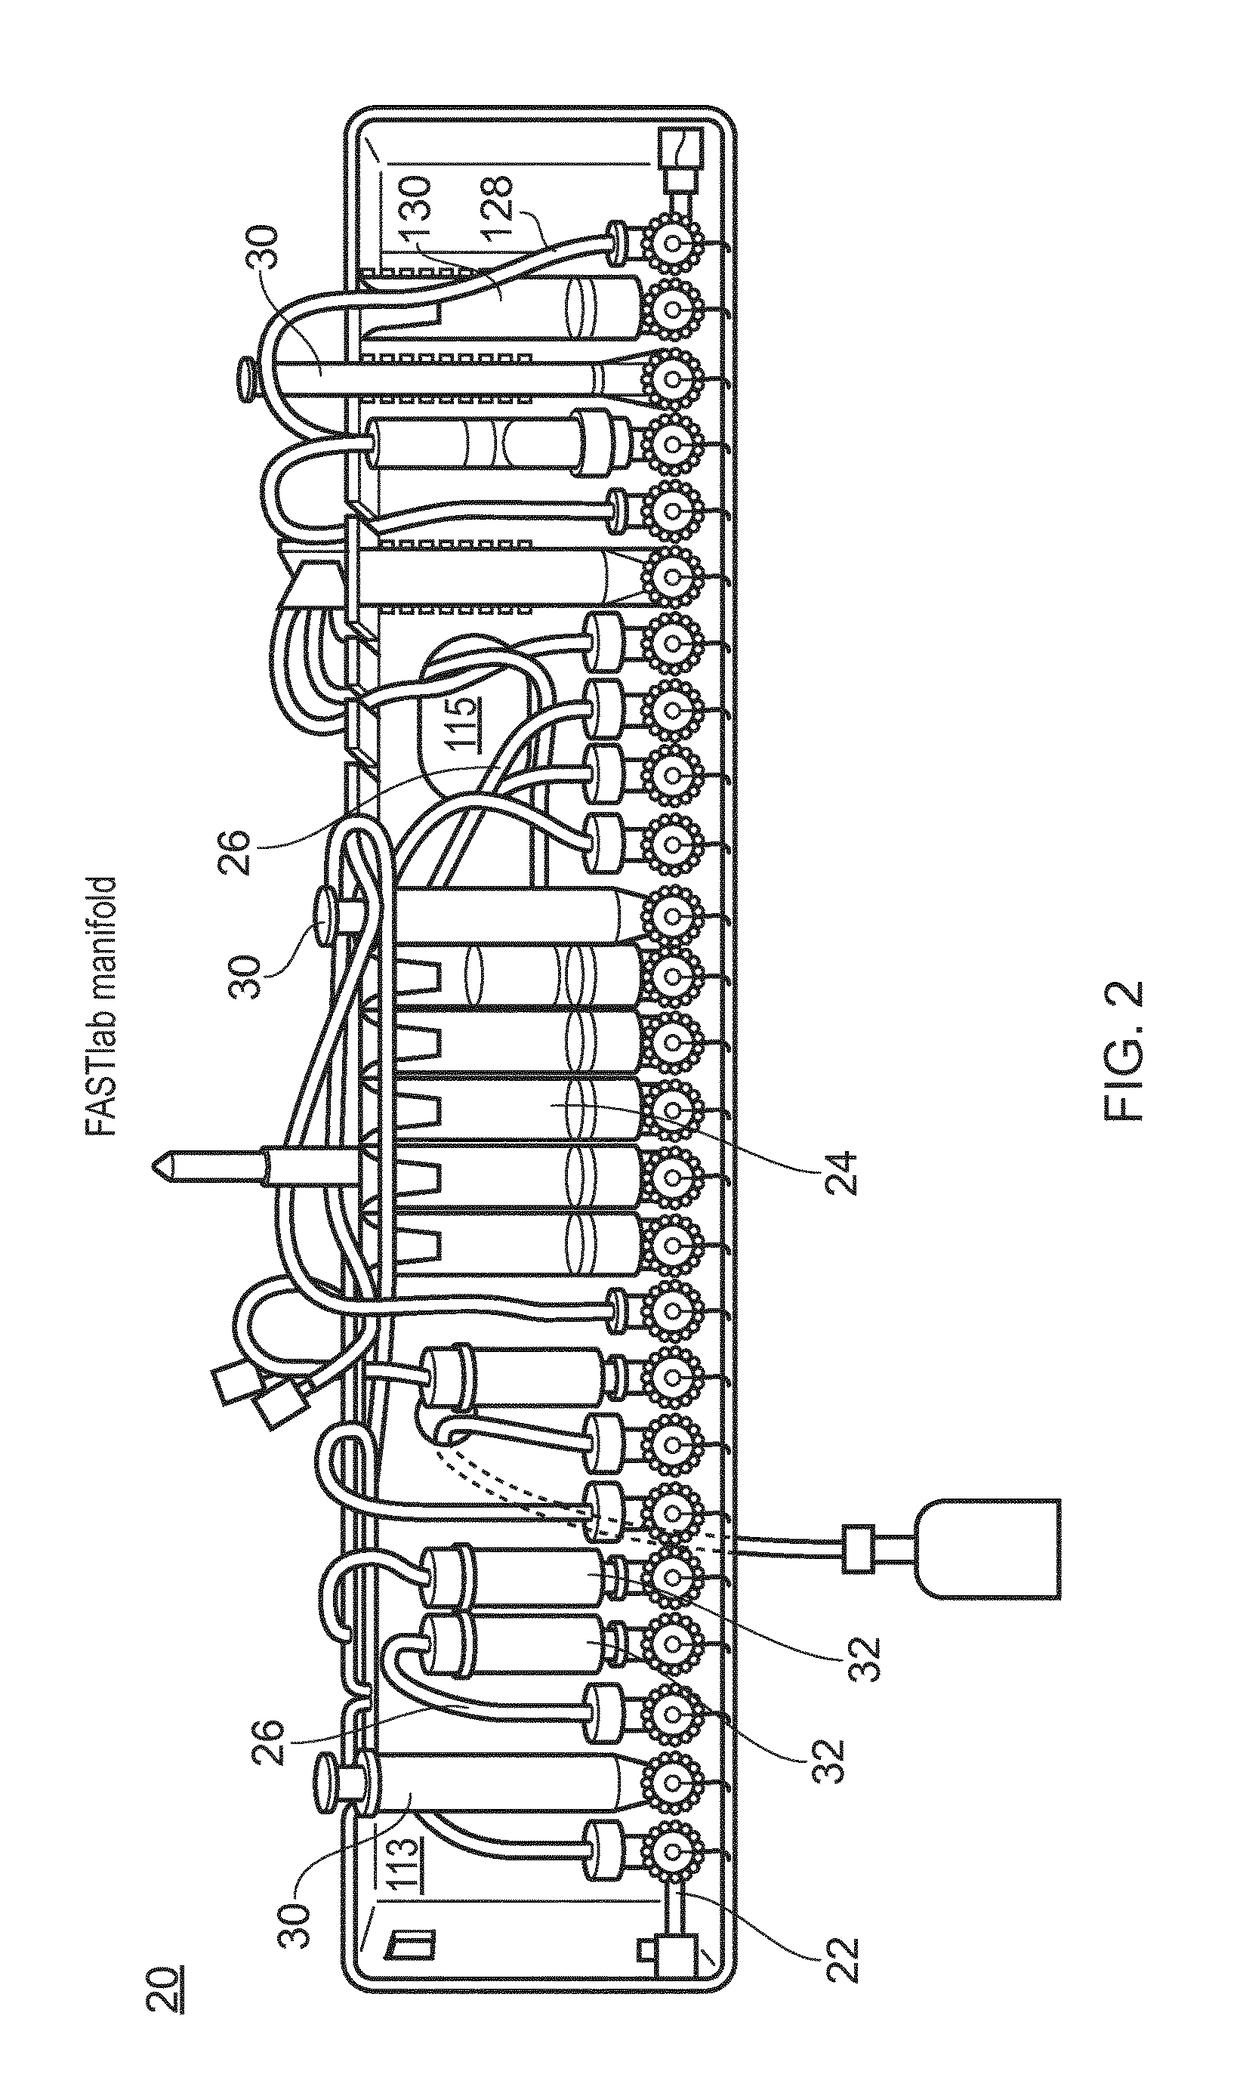 Valve Manifolds for Simulated Moving Bed Chromatography